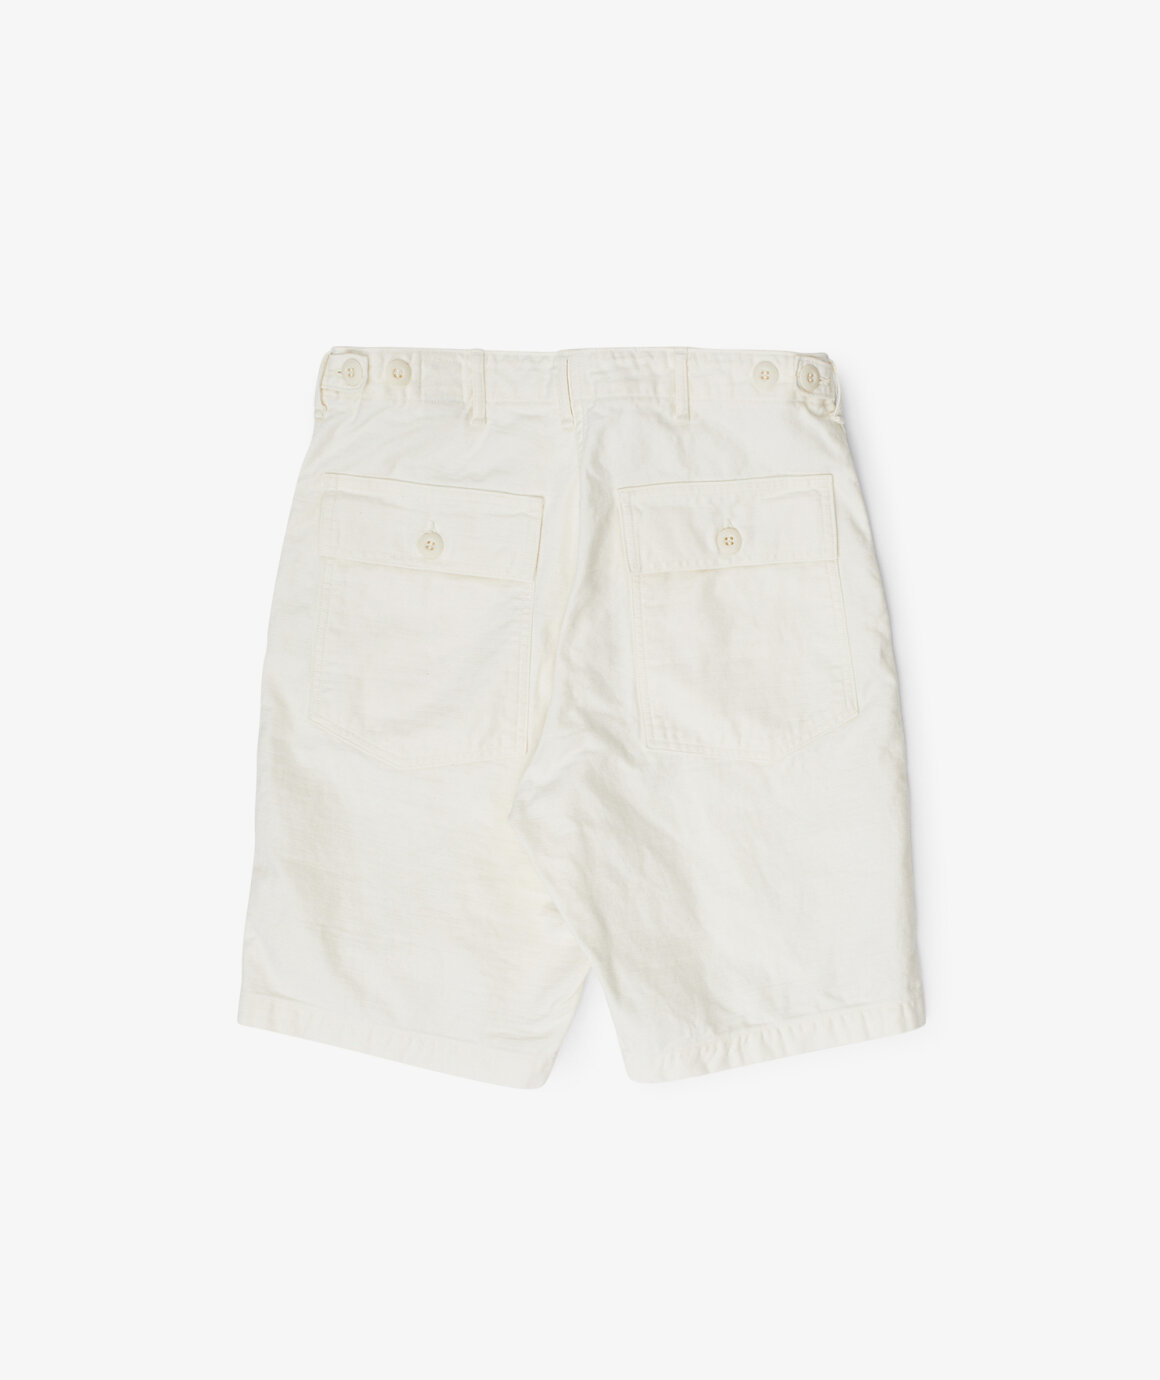 Norse Store | Shipping Worldwide - orSlow US ARMY FATIGUE SHORTS - Ecru